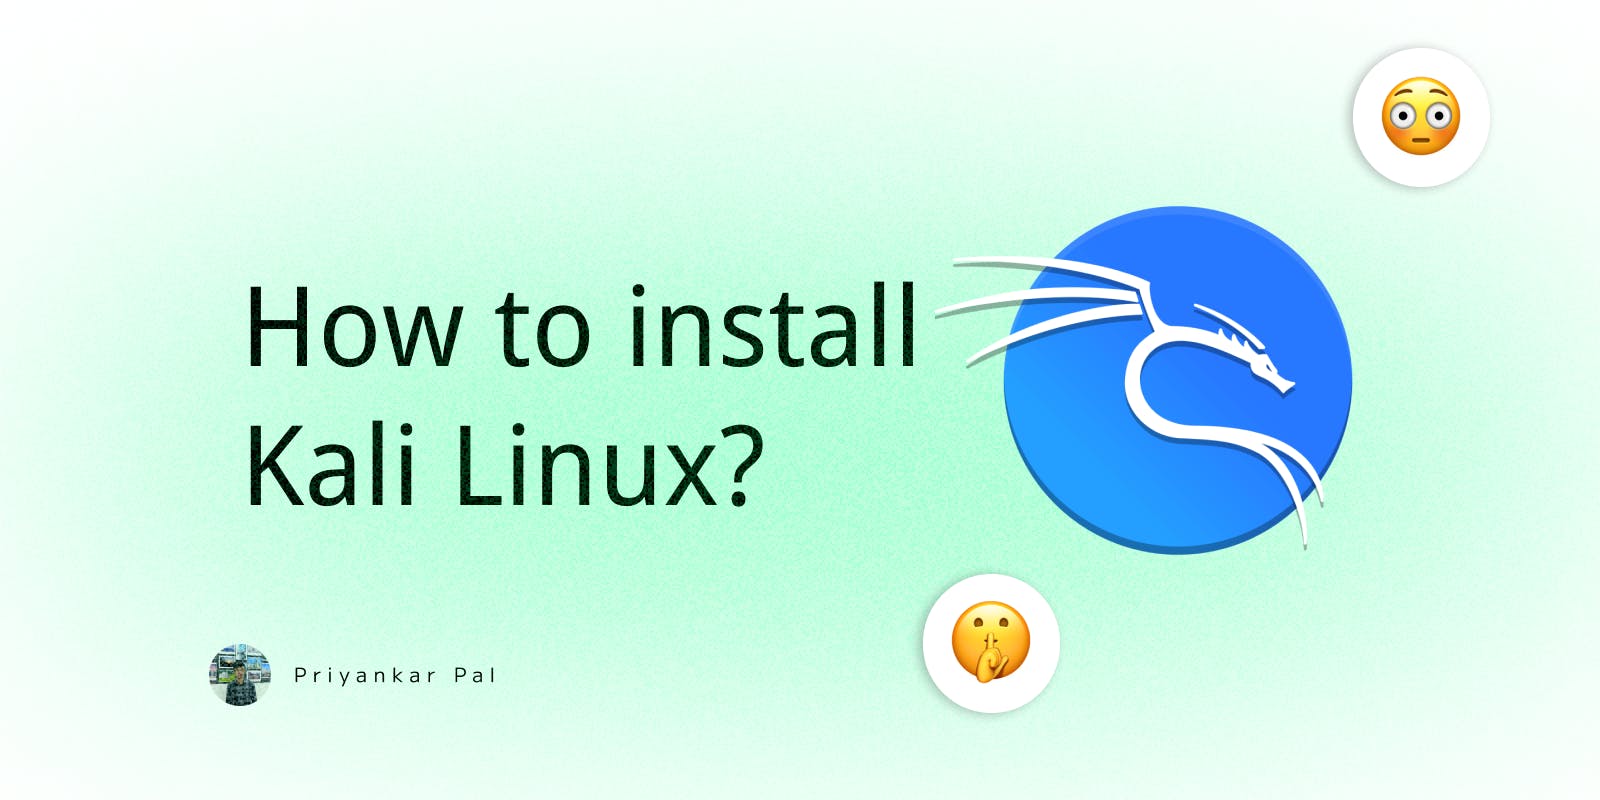 How to Boot Kali Linux on Any Laptop or Desktop: Step-by-Step Guide 💯